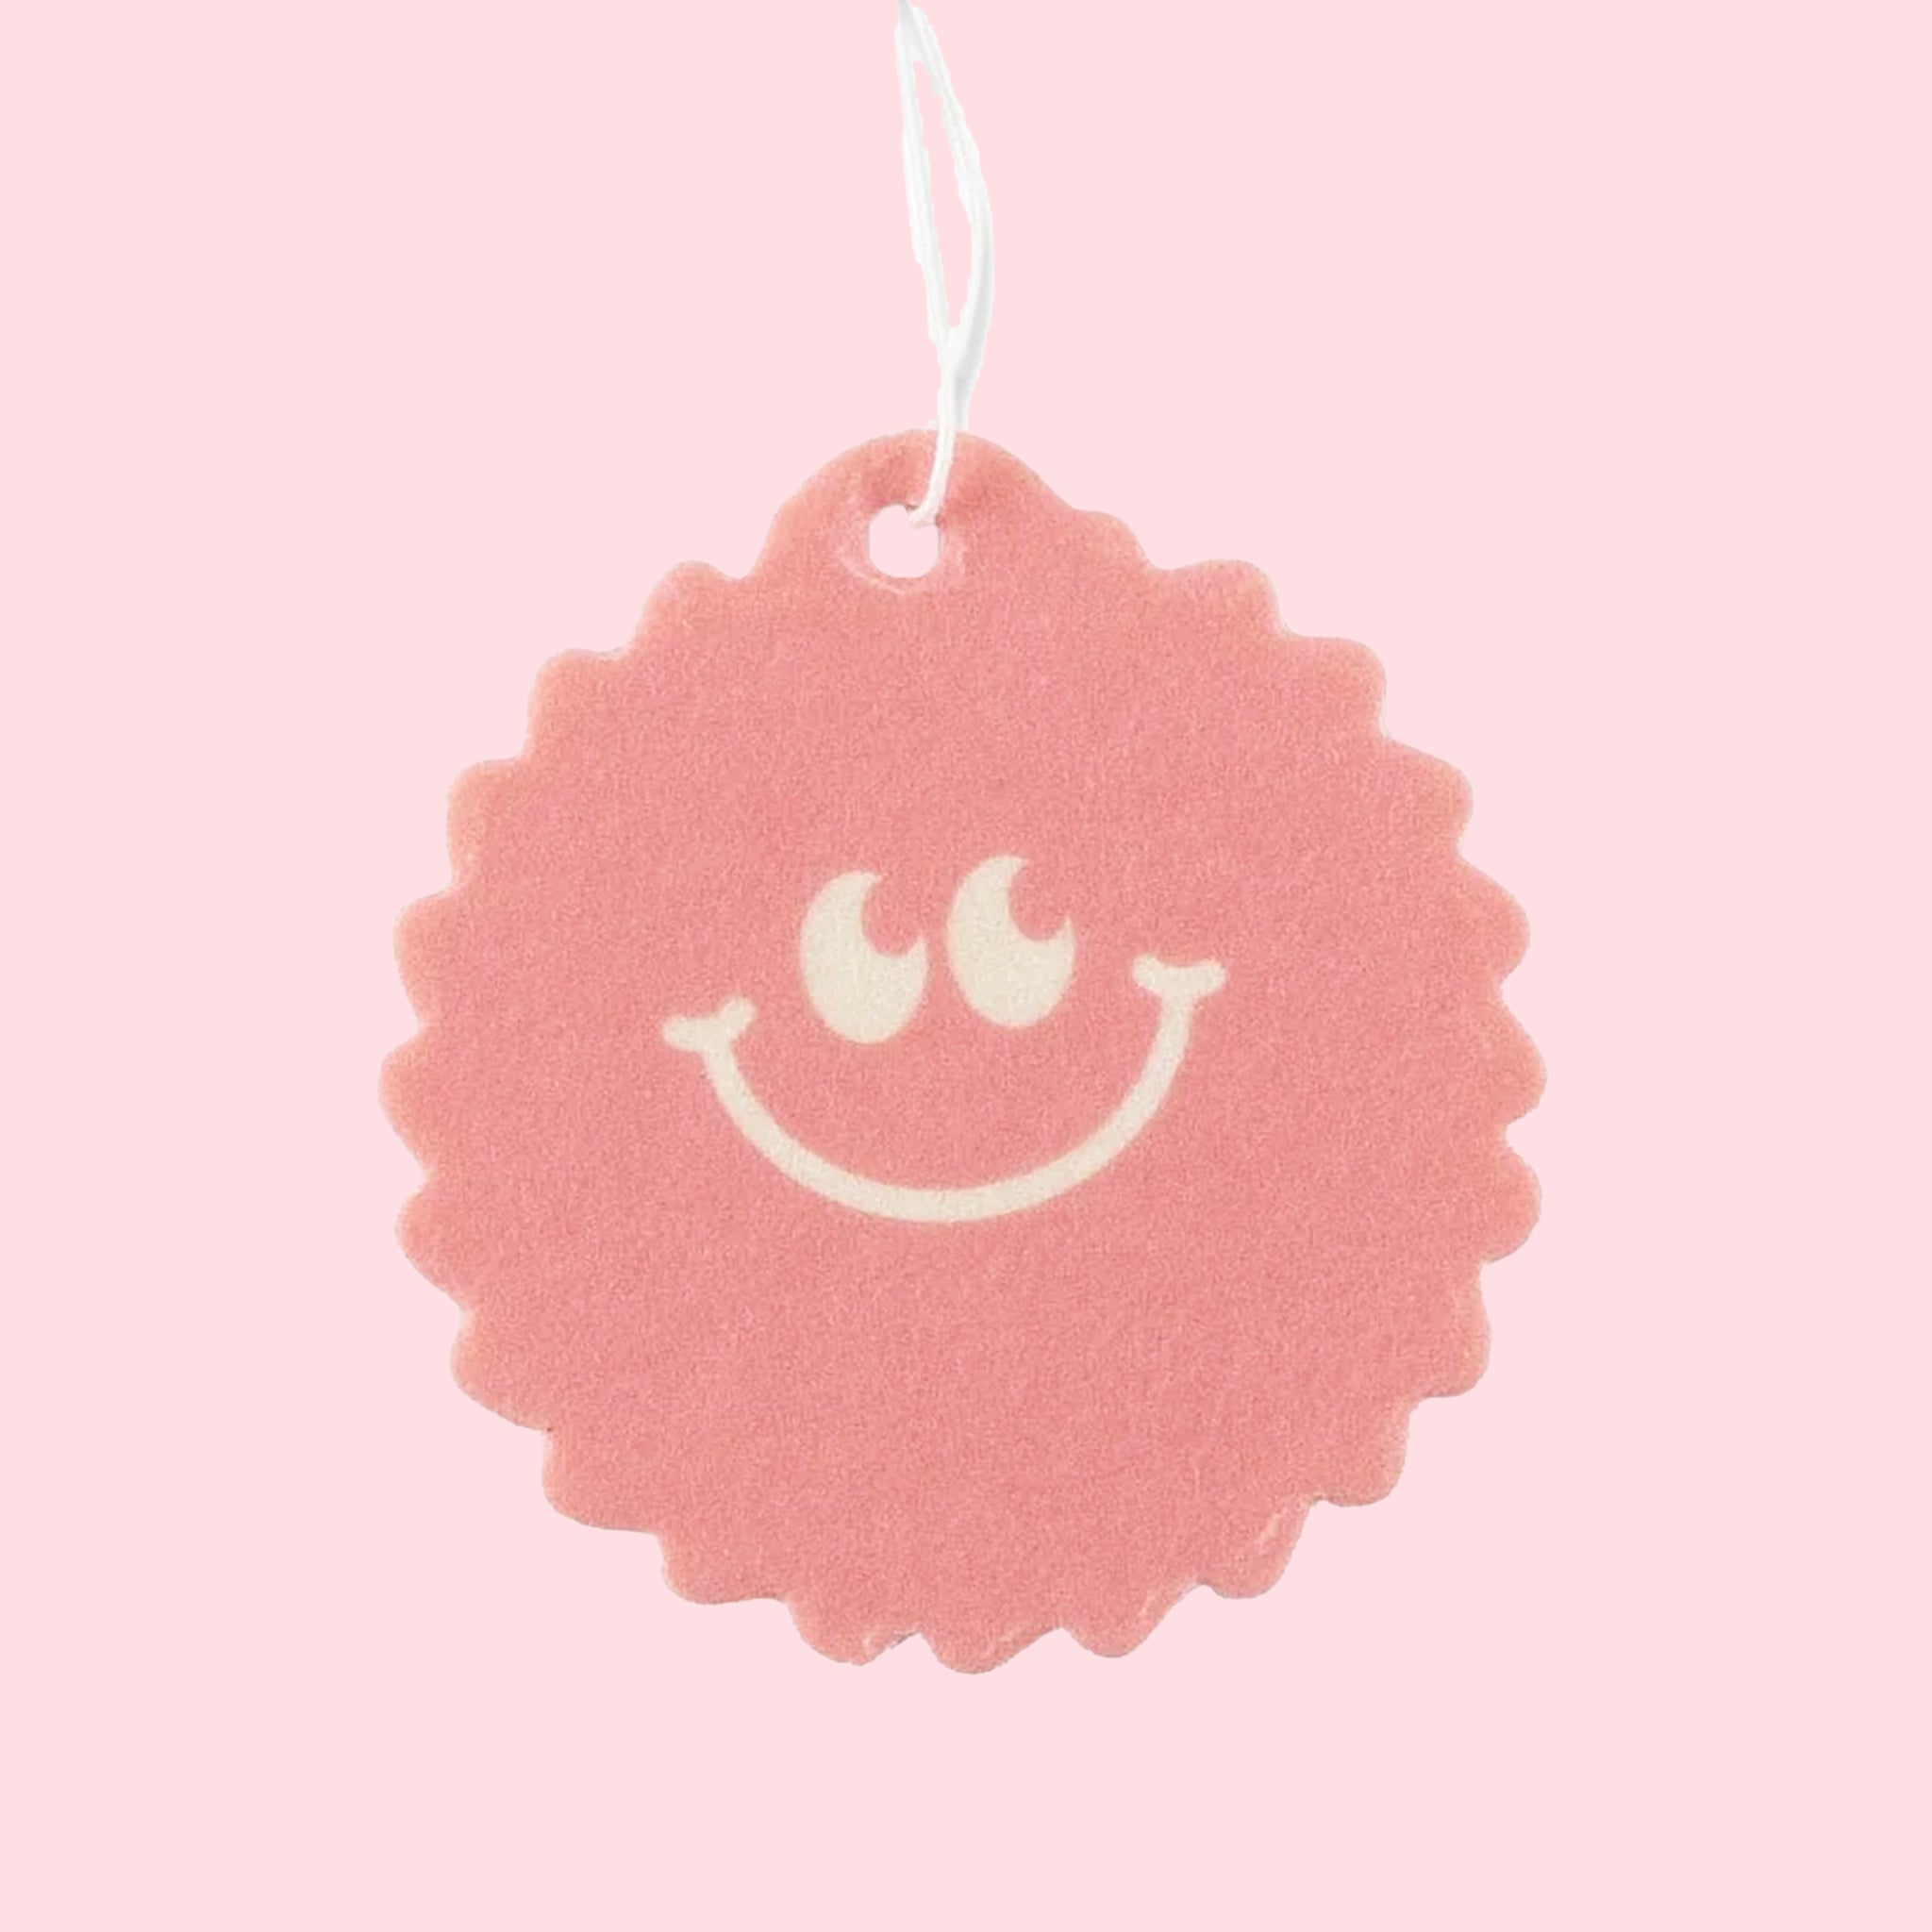 On a pink background is a pink sun shaped air freshener with a smiley face. 